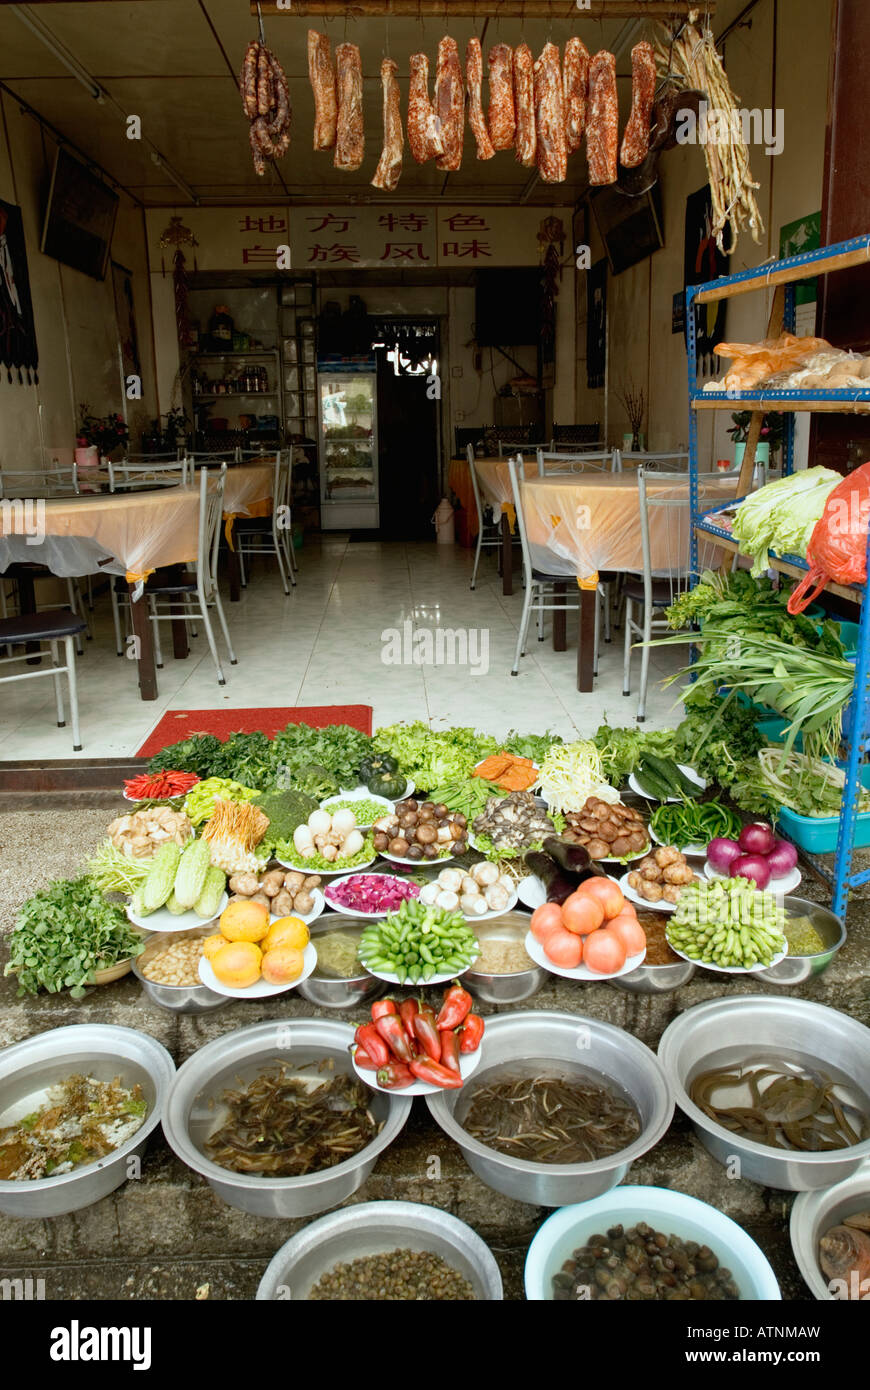 China, Seafood and Vegetables On Display in Front of Restaurant, Dali Ancient City, Yunnan Province Stock Photo